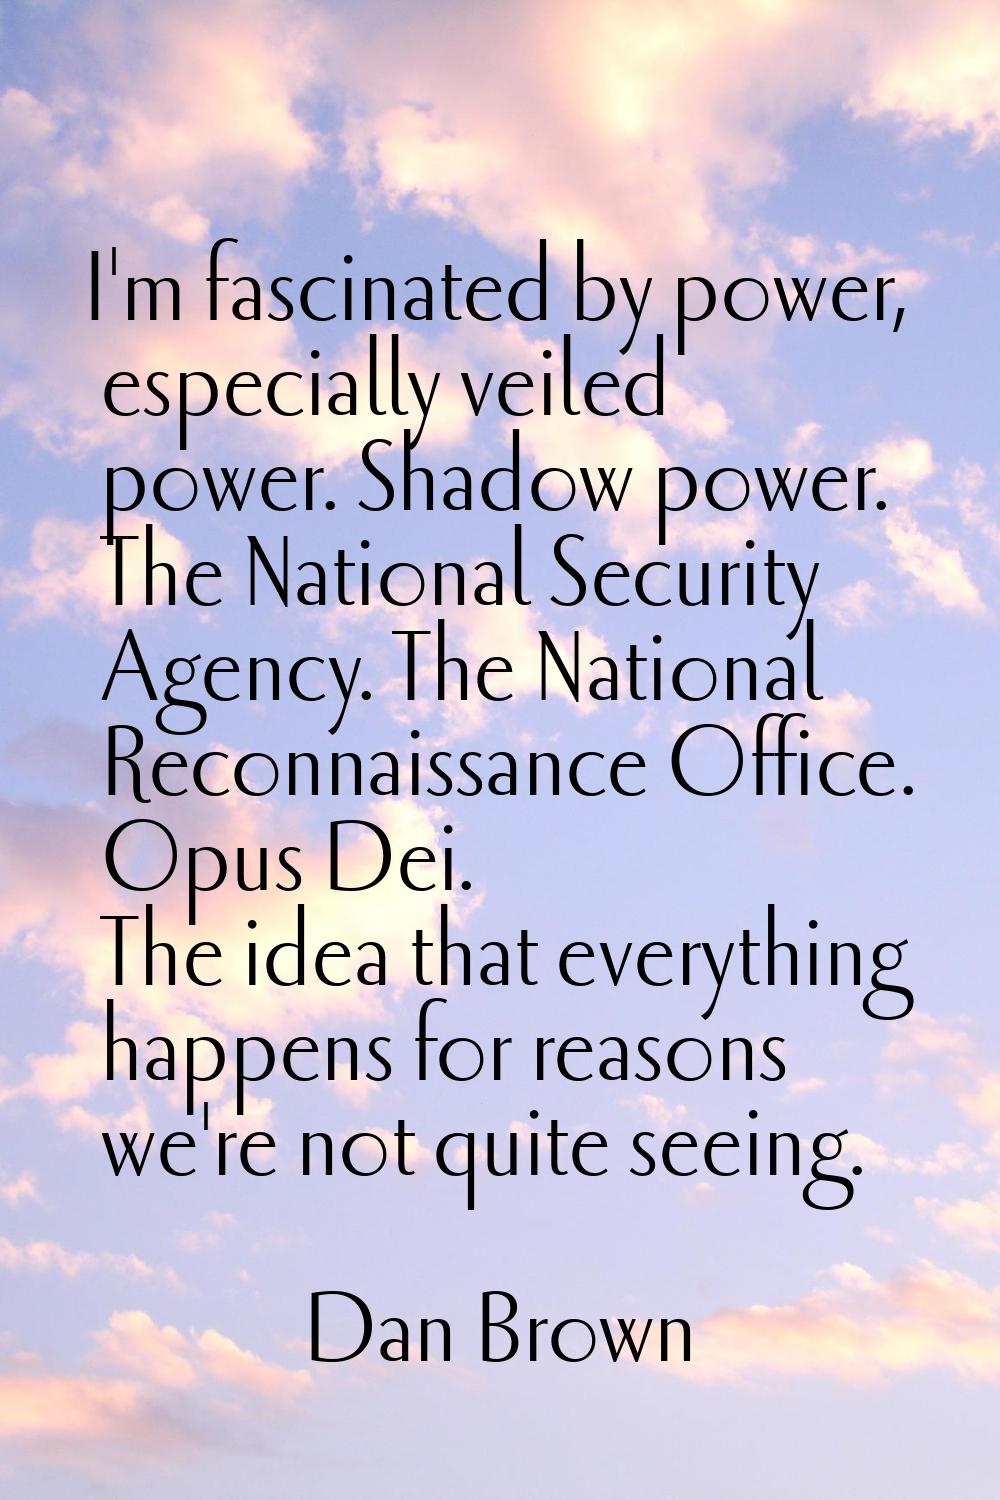 I'm fascinated by power, especially veiled power. Shadow power. The National Security Agency. The N